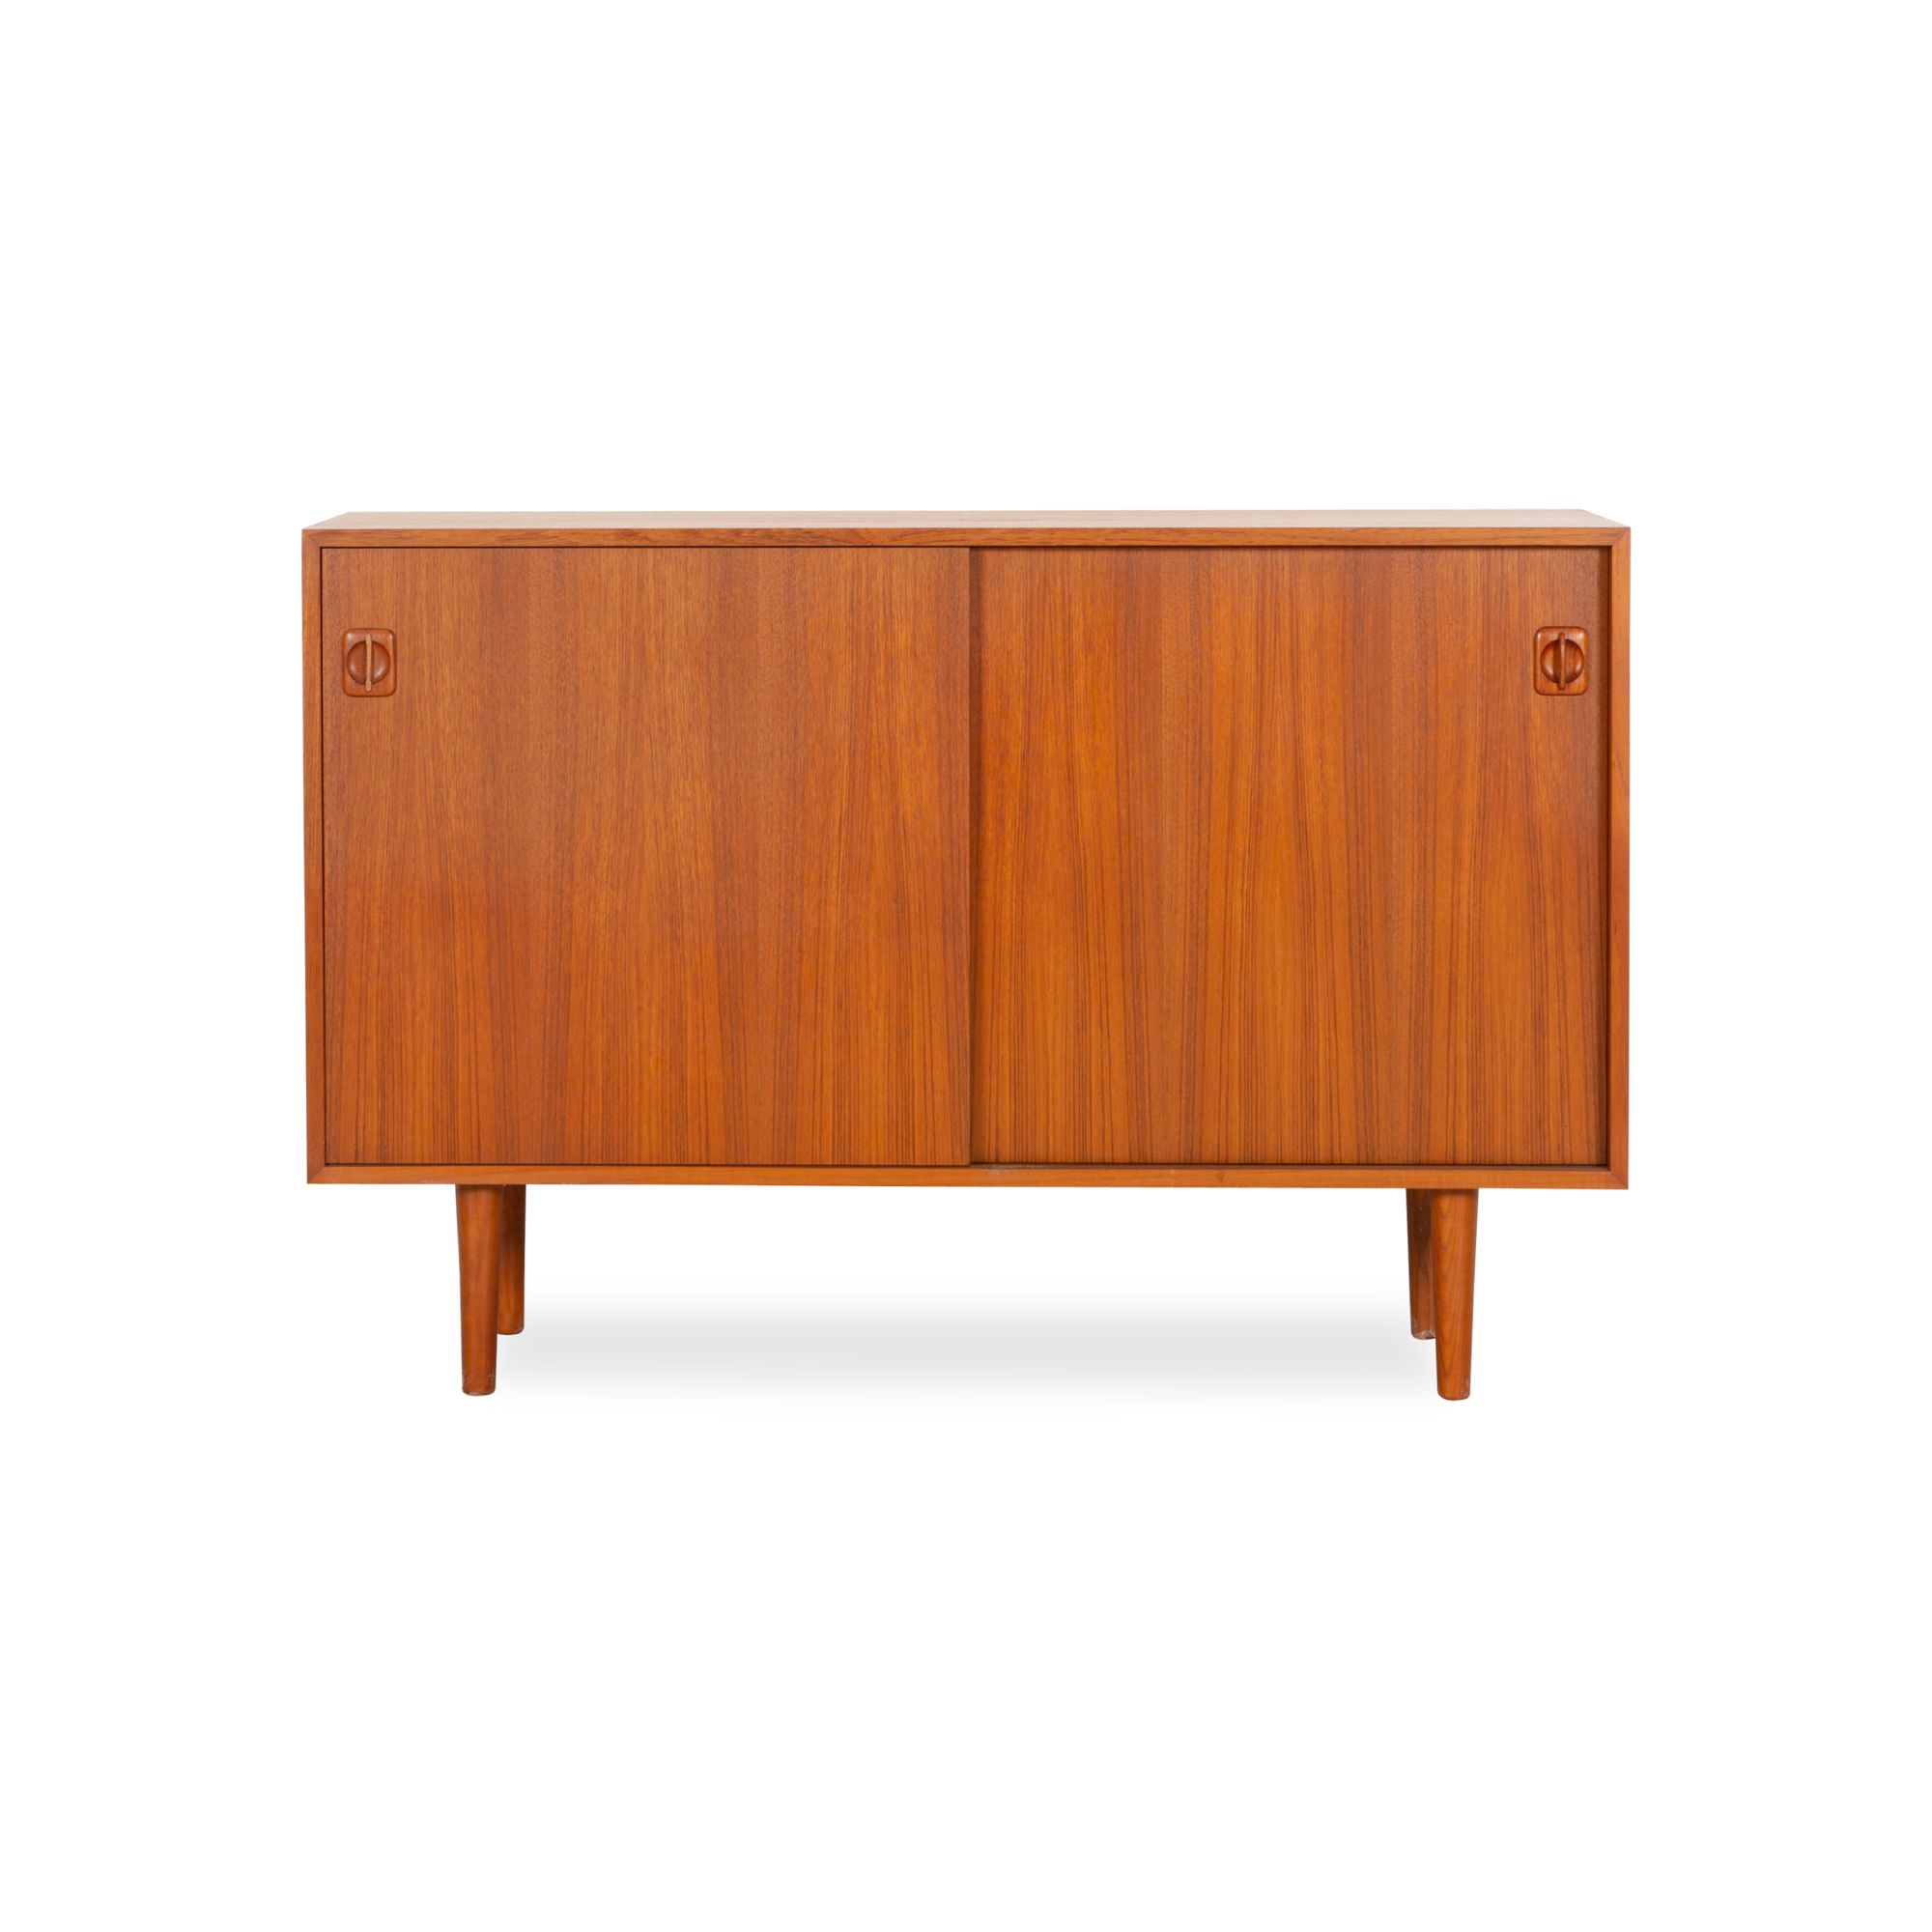 Displaying an elegantly aged teak finish, this vintage sideboard was produced in Denmark, circa 1960s.